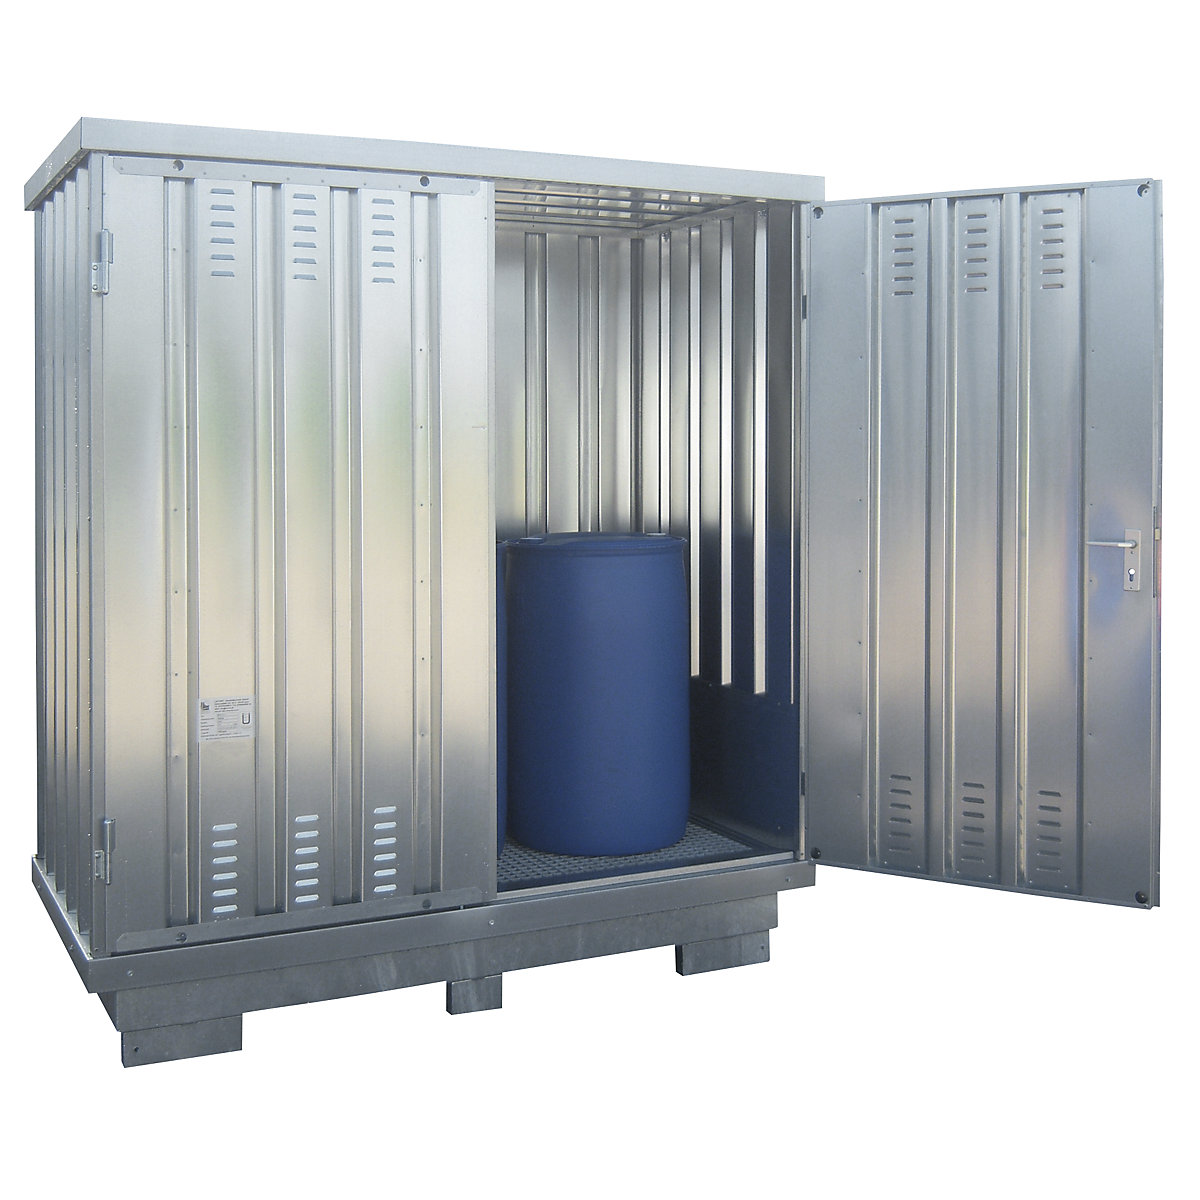 Hazardous goods container also for the active storage of flammable media, external HxWxD 2385 x 2075 x 1075 mm, zinc plated